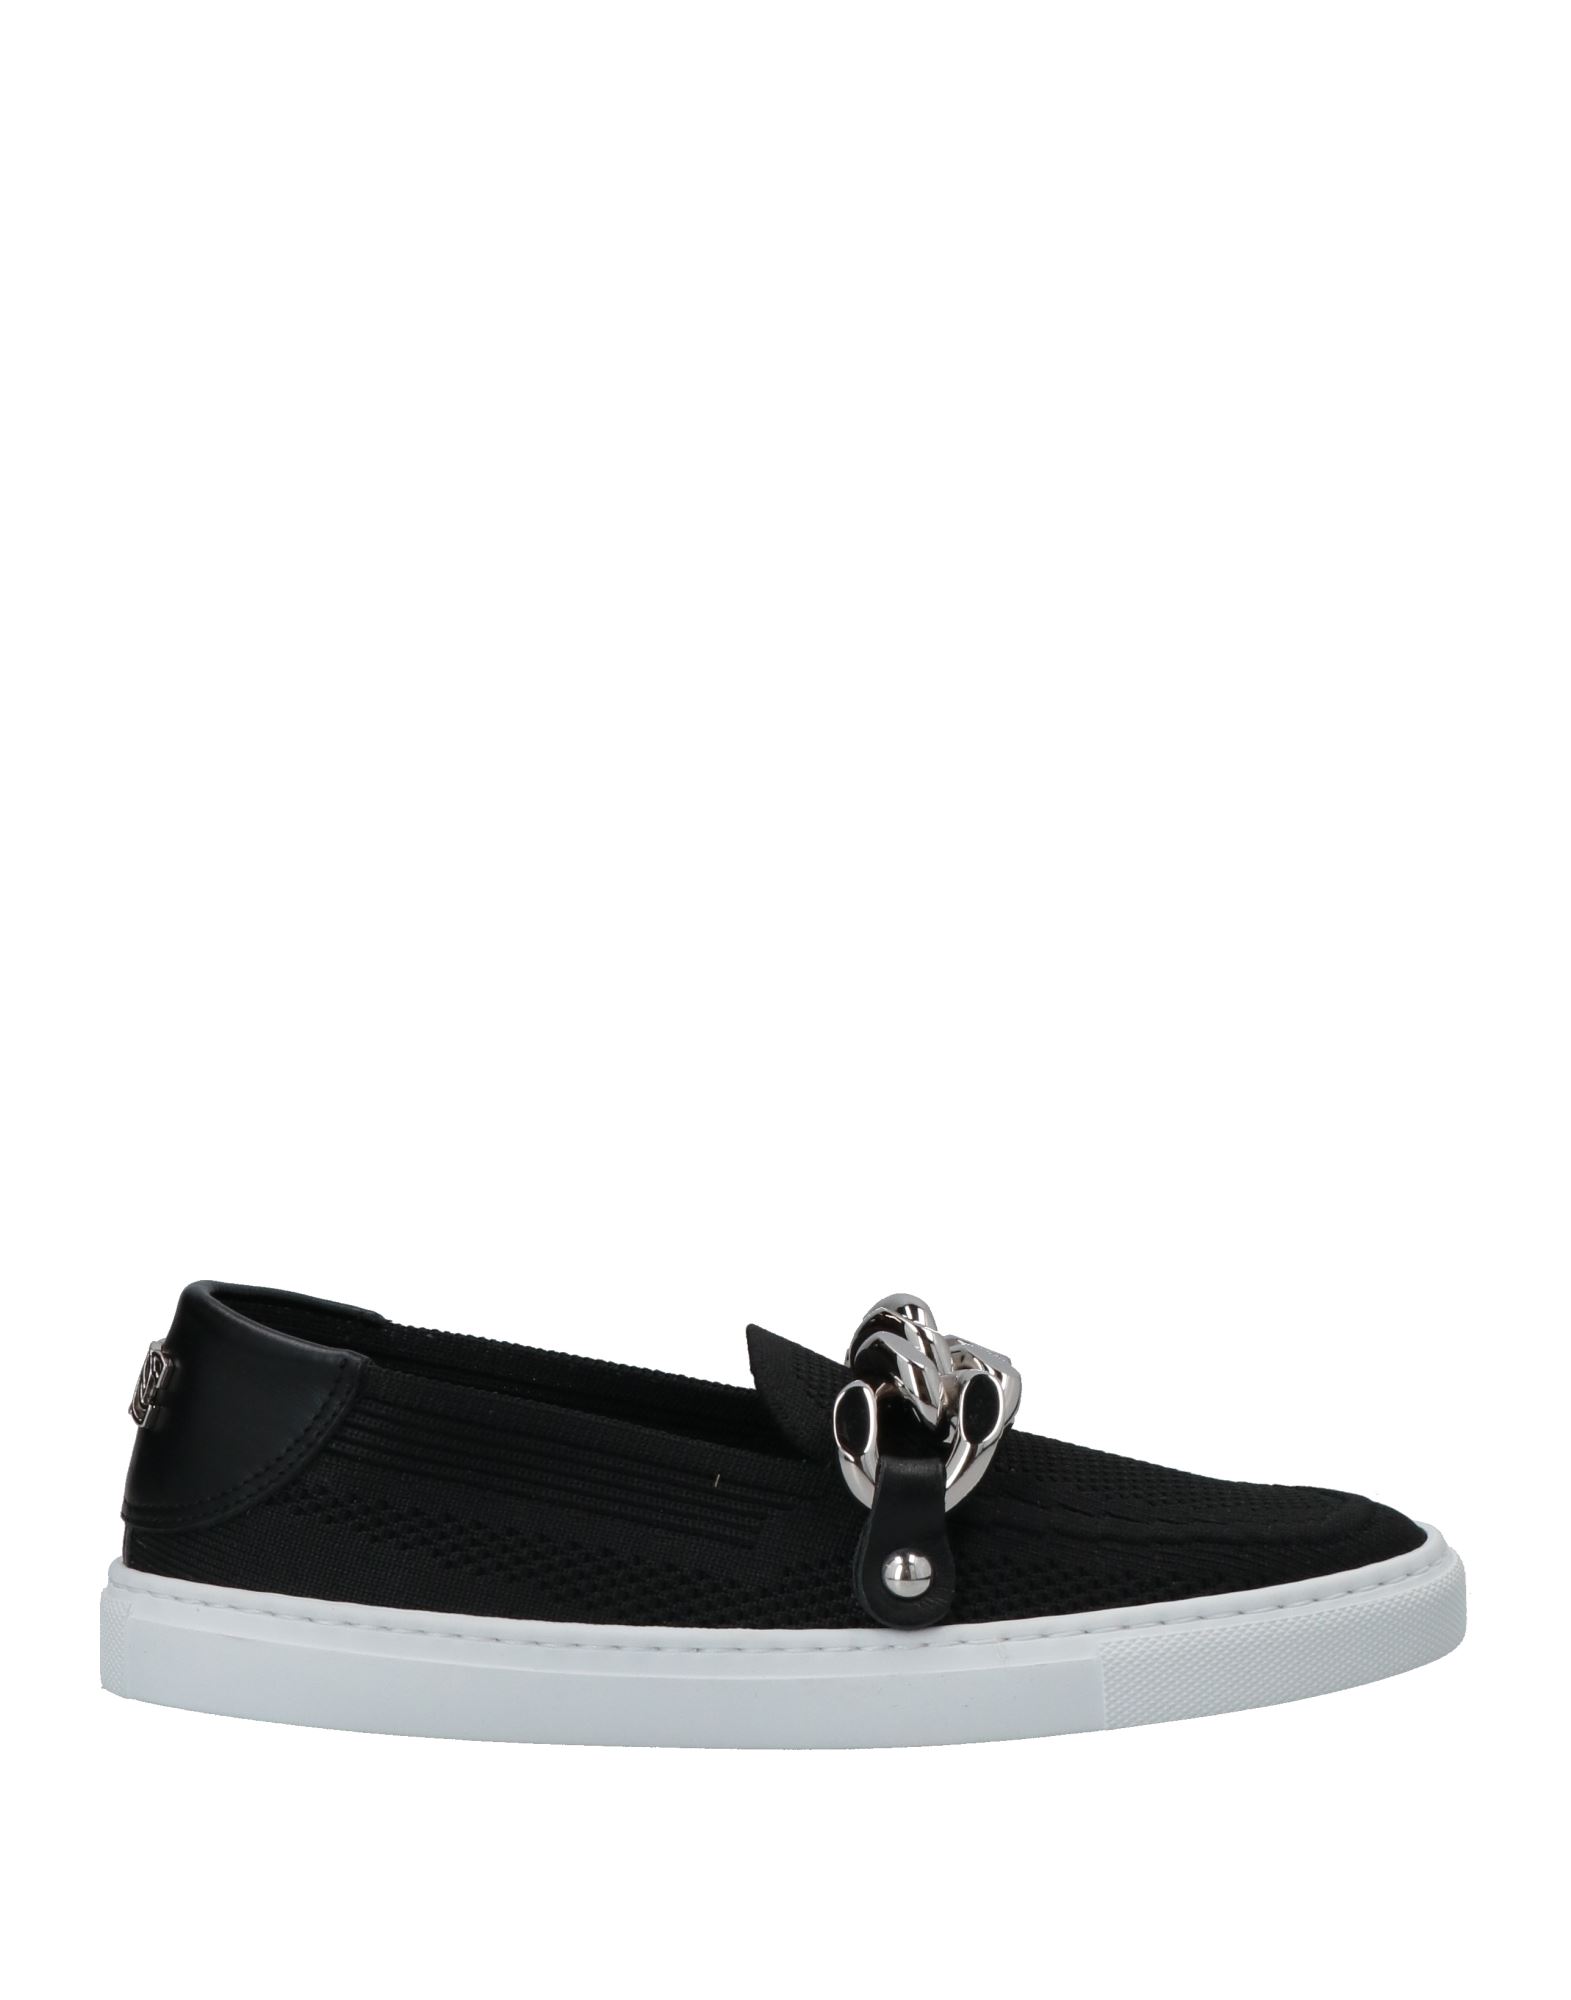 Casadei Loafers In Black